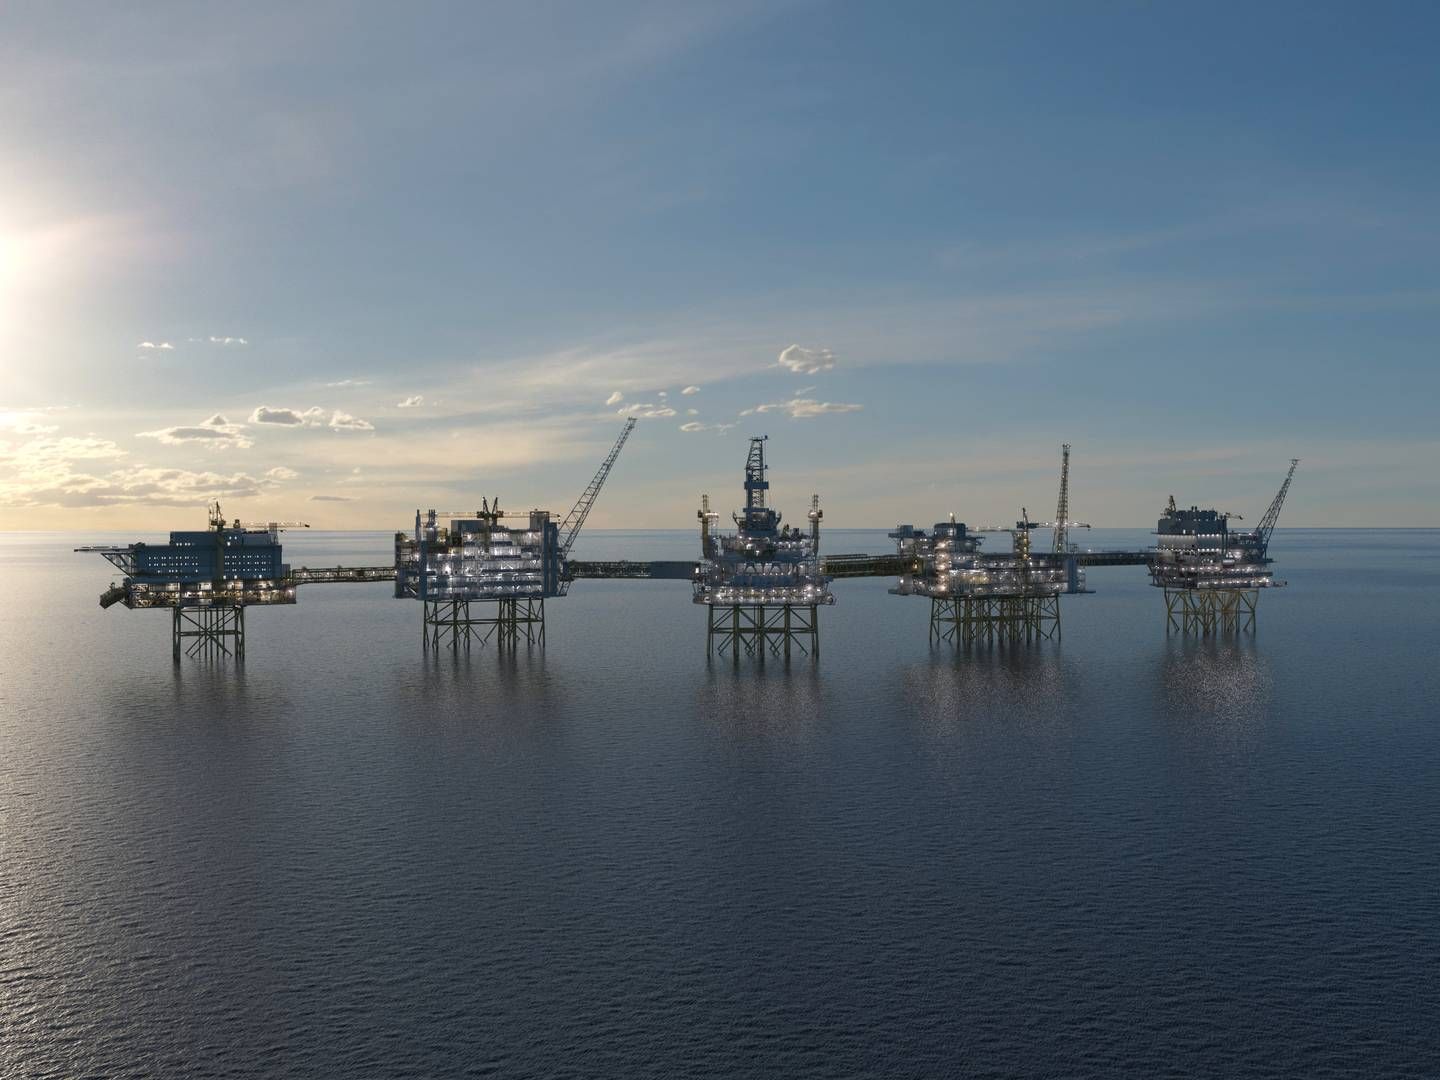 Many exploration projects had to be postponed, but Johan Sverdrup made output surge and investments were maintained in Norway's oil industry last year. | Photo: PR / Equinor